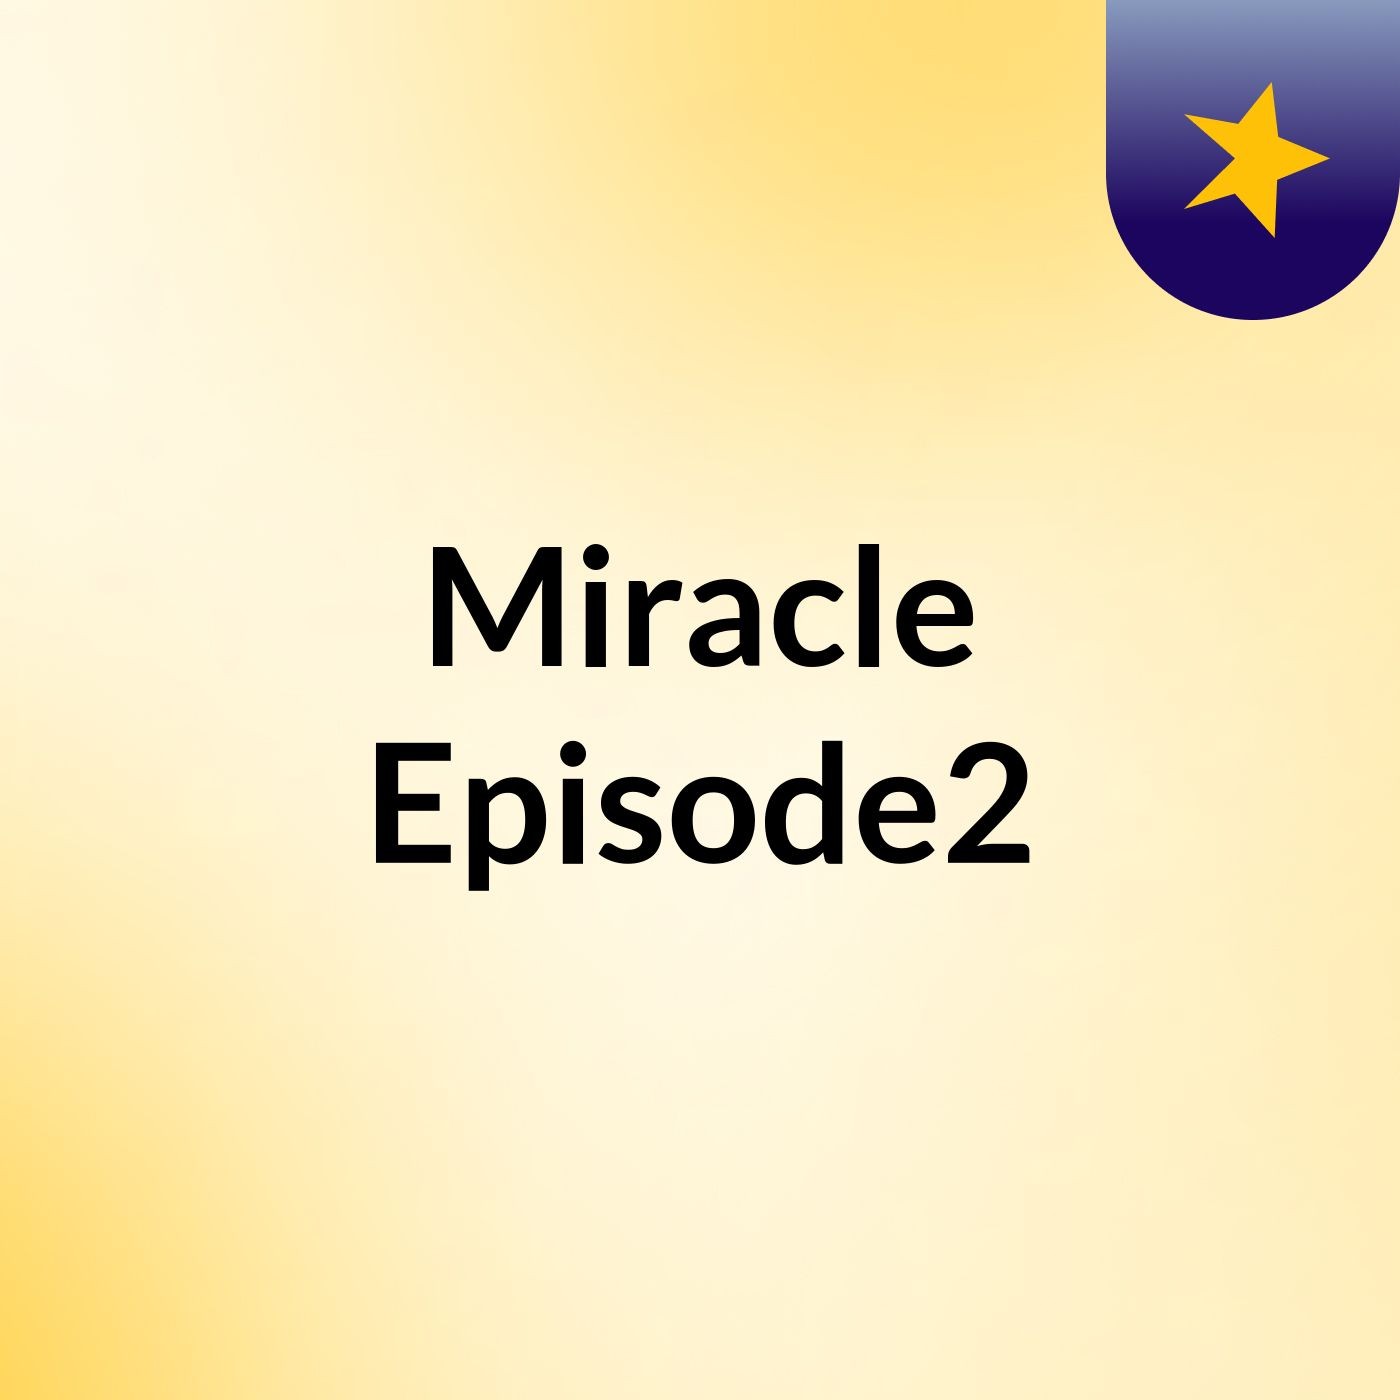 Episode 4 - Miracle Episode2